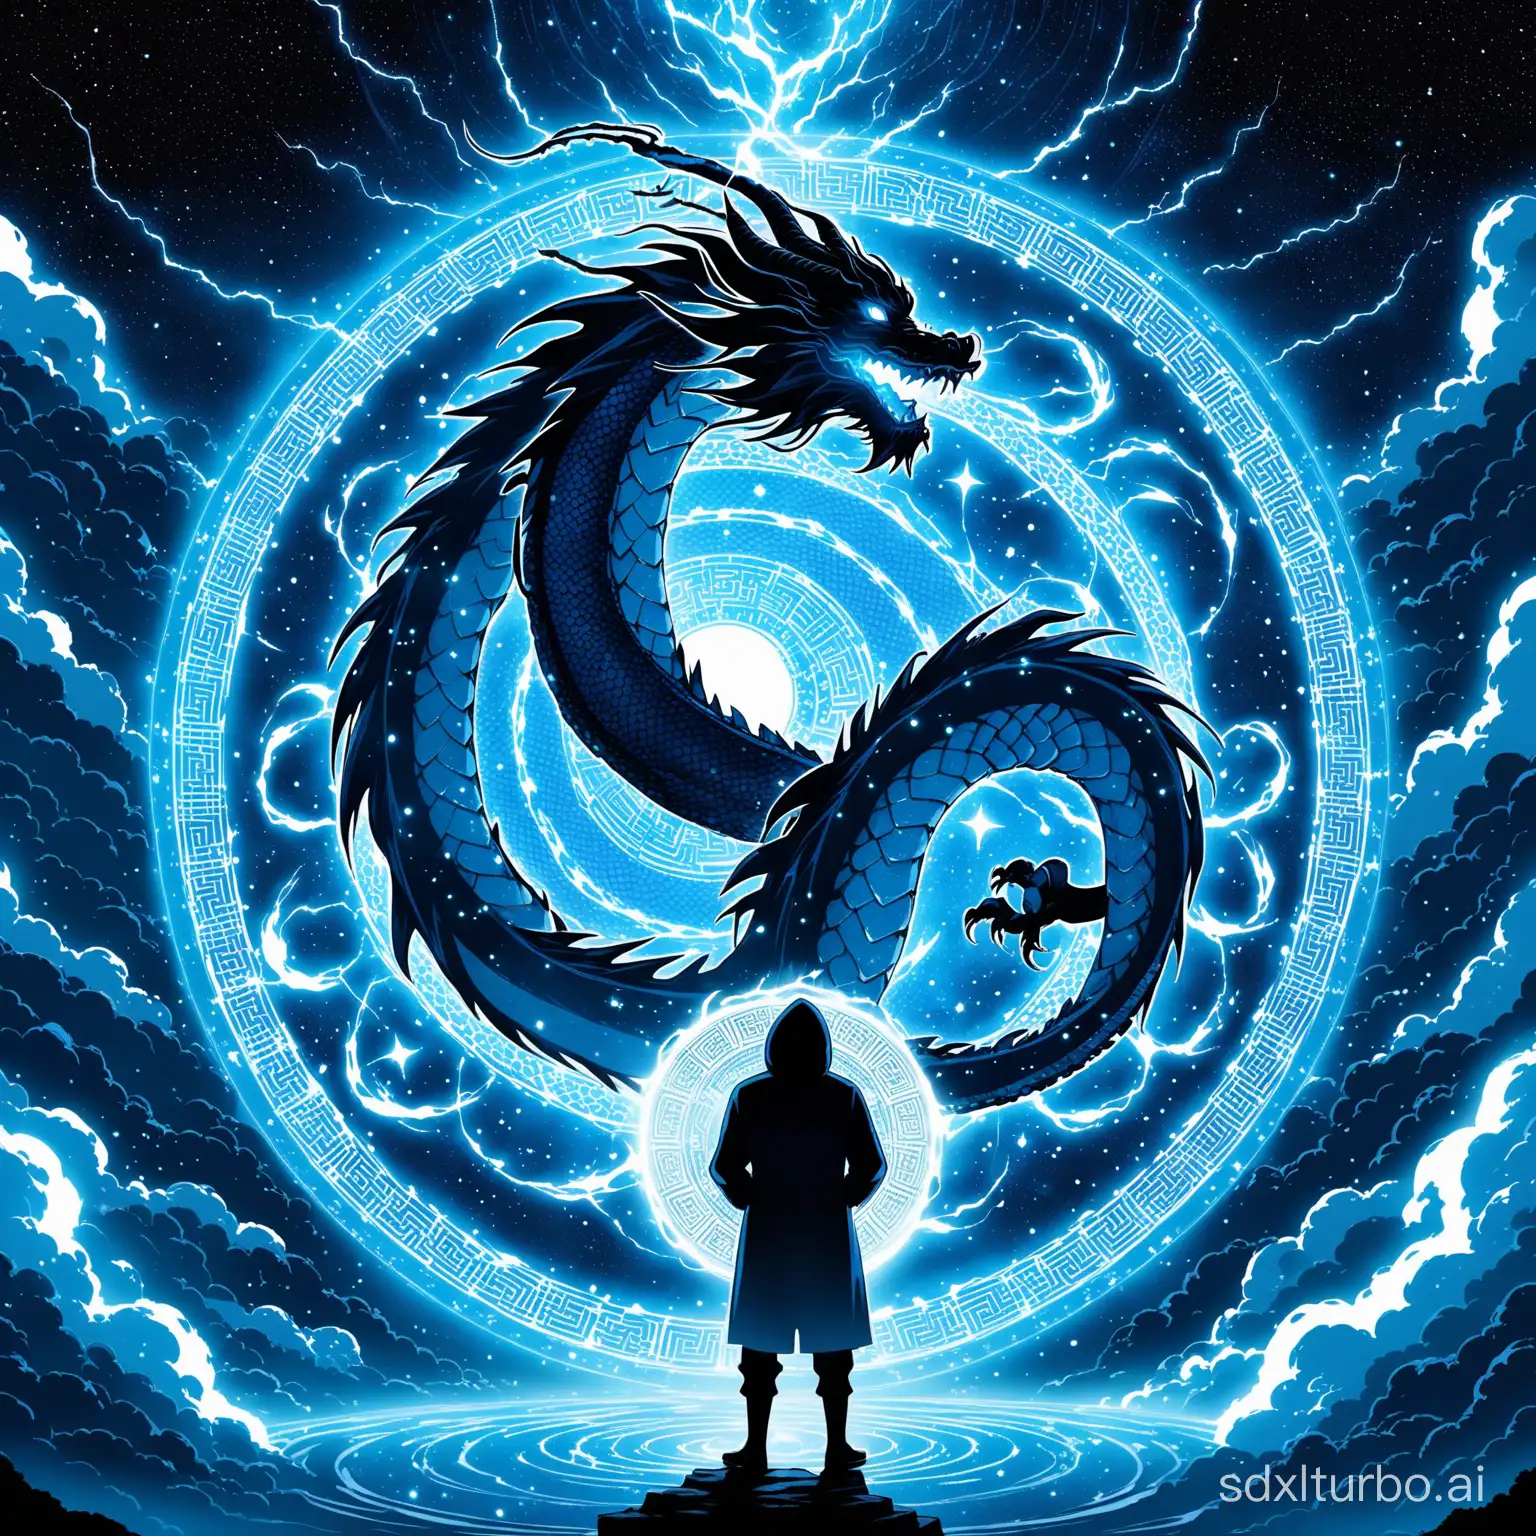 Hooded-Figure-Summoning-Giant-Blue-Chinese-Dragon-under-Starry-Sky